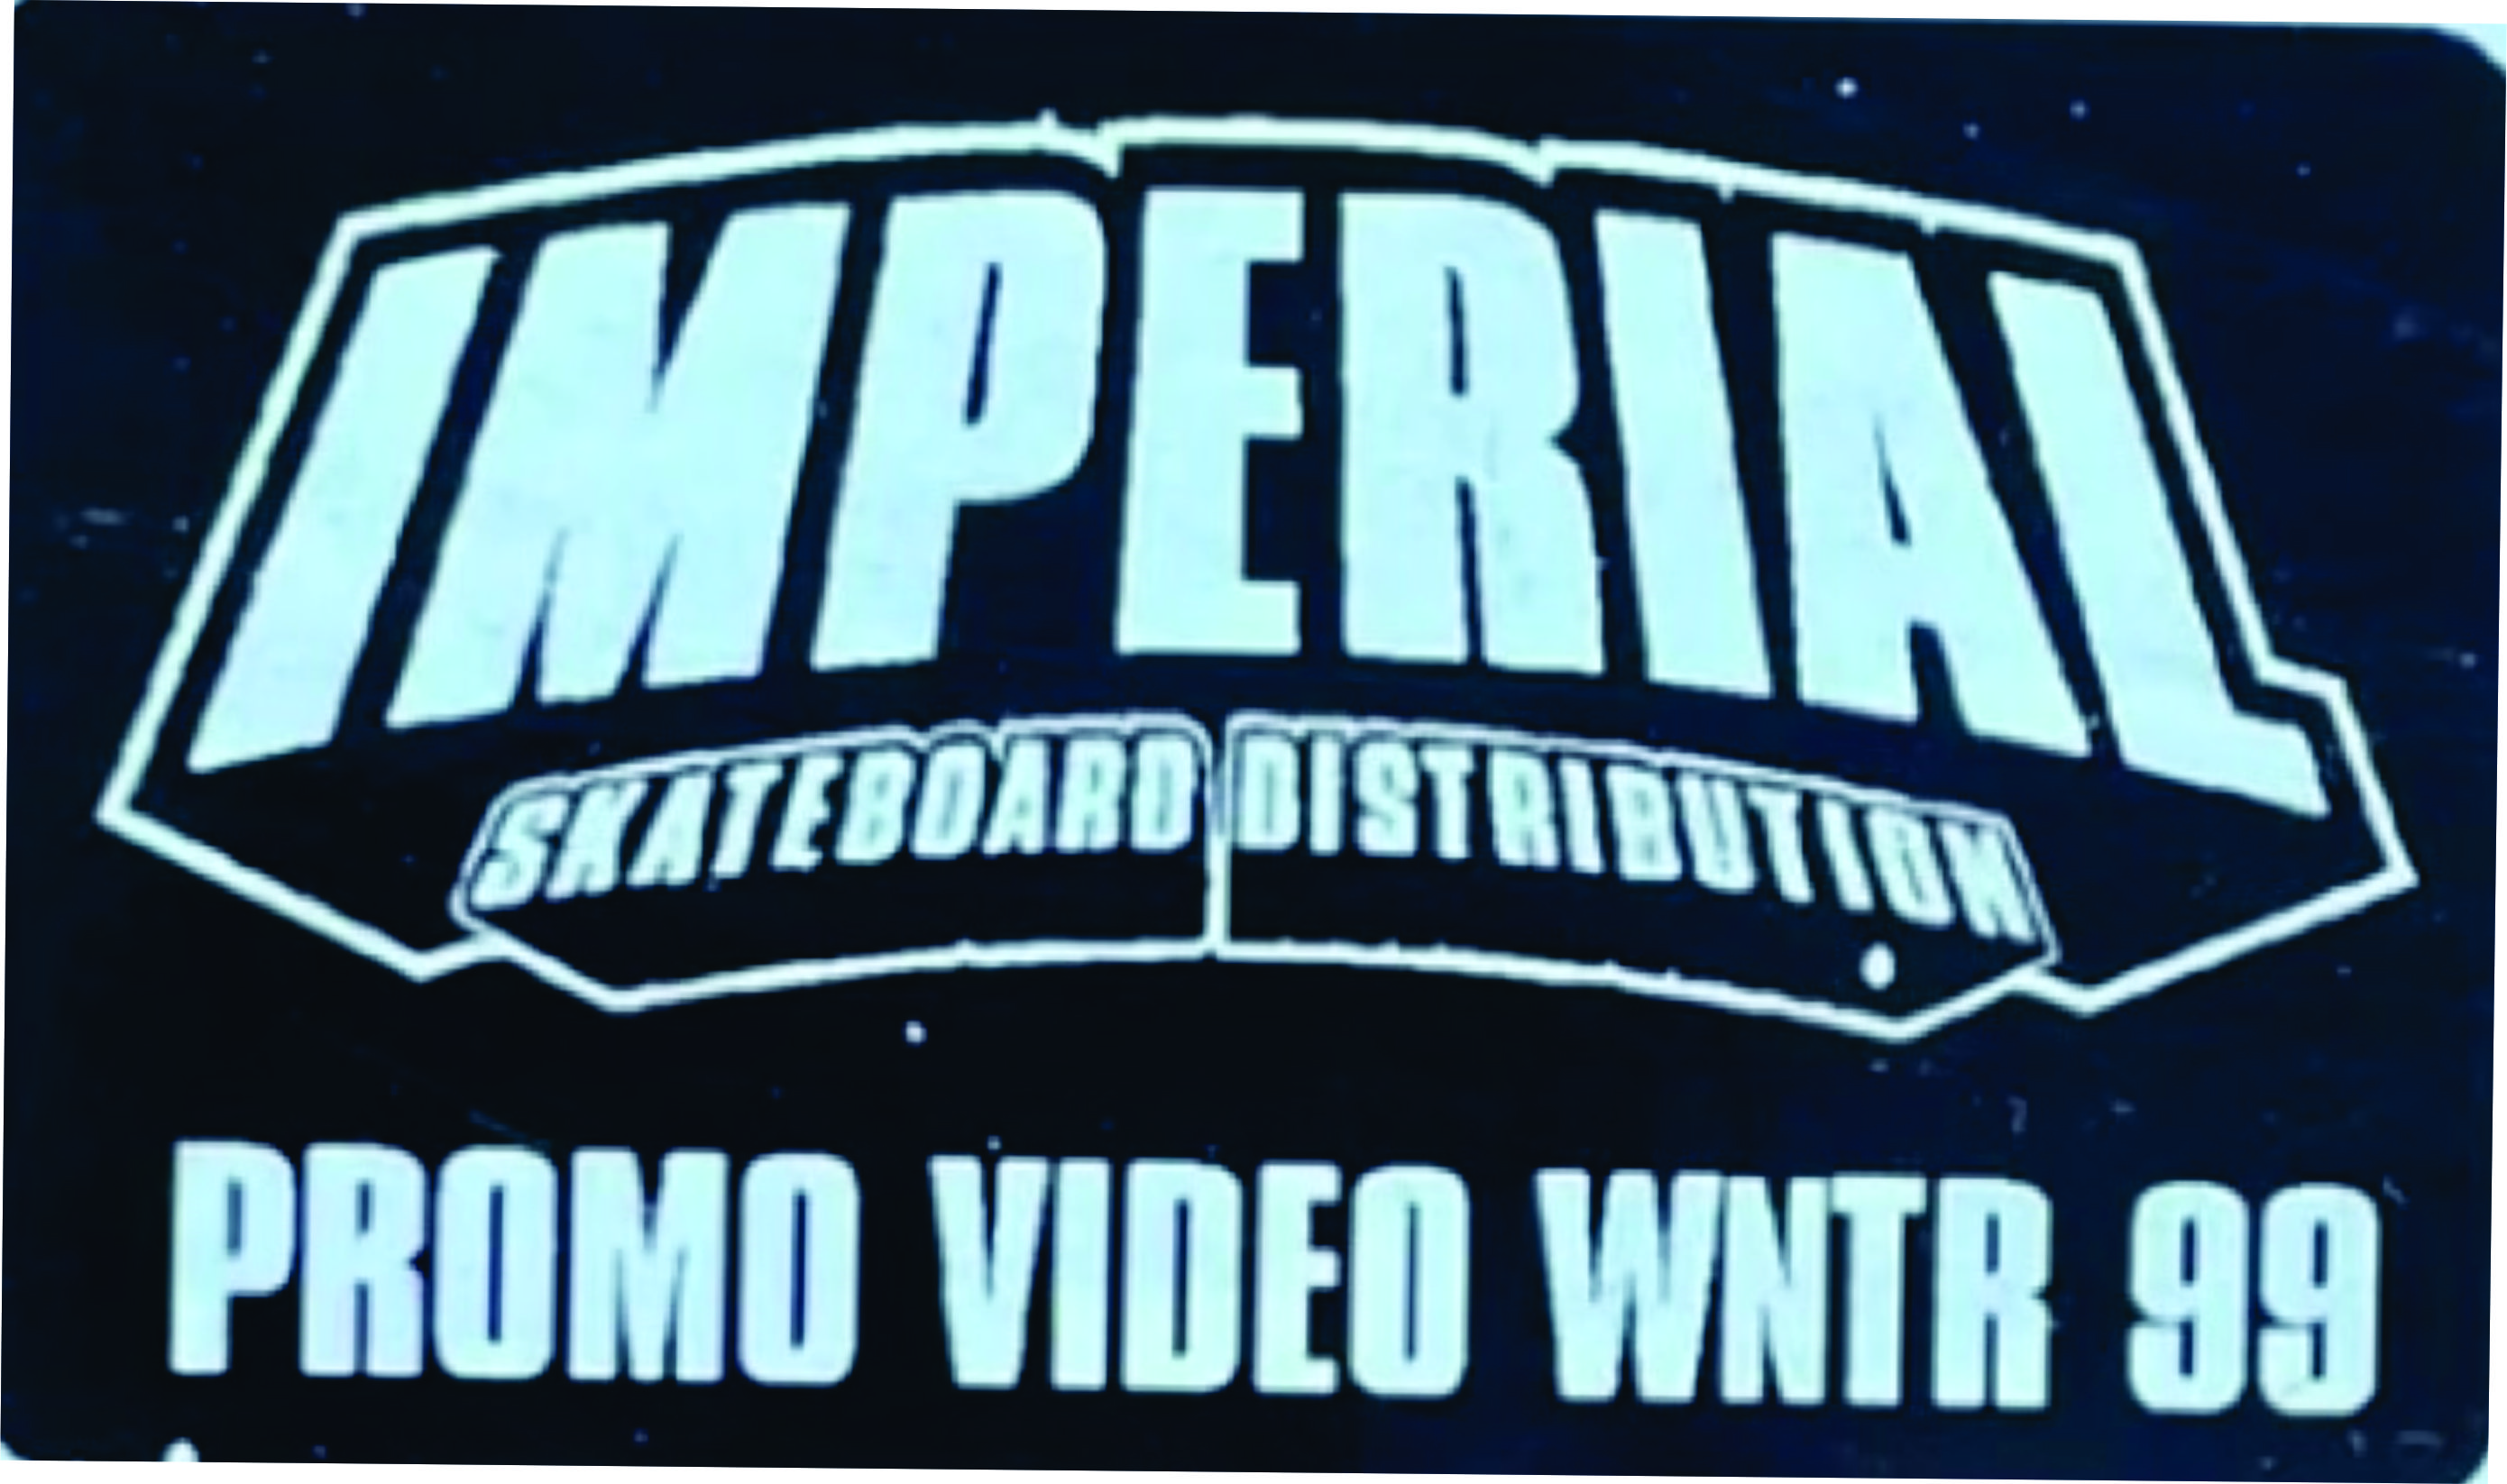 Imperial - Promo Video WNTR 99 cover